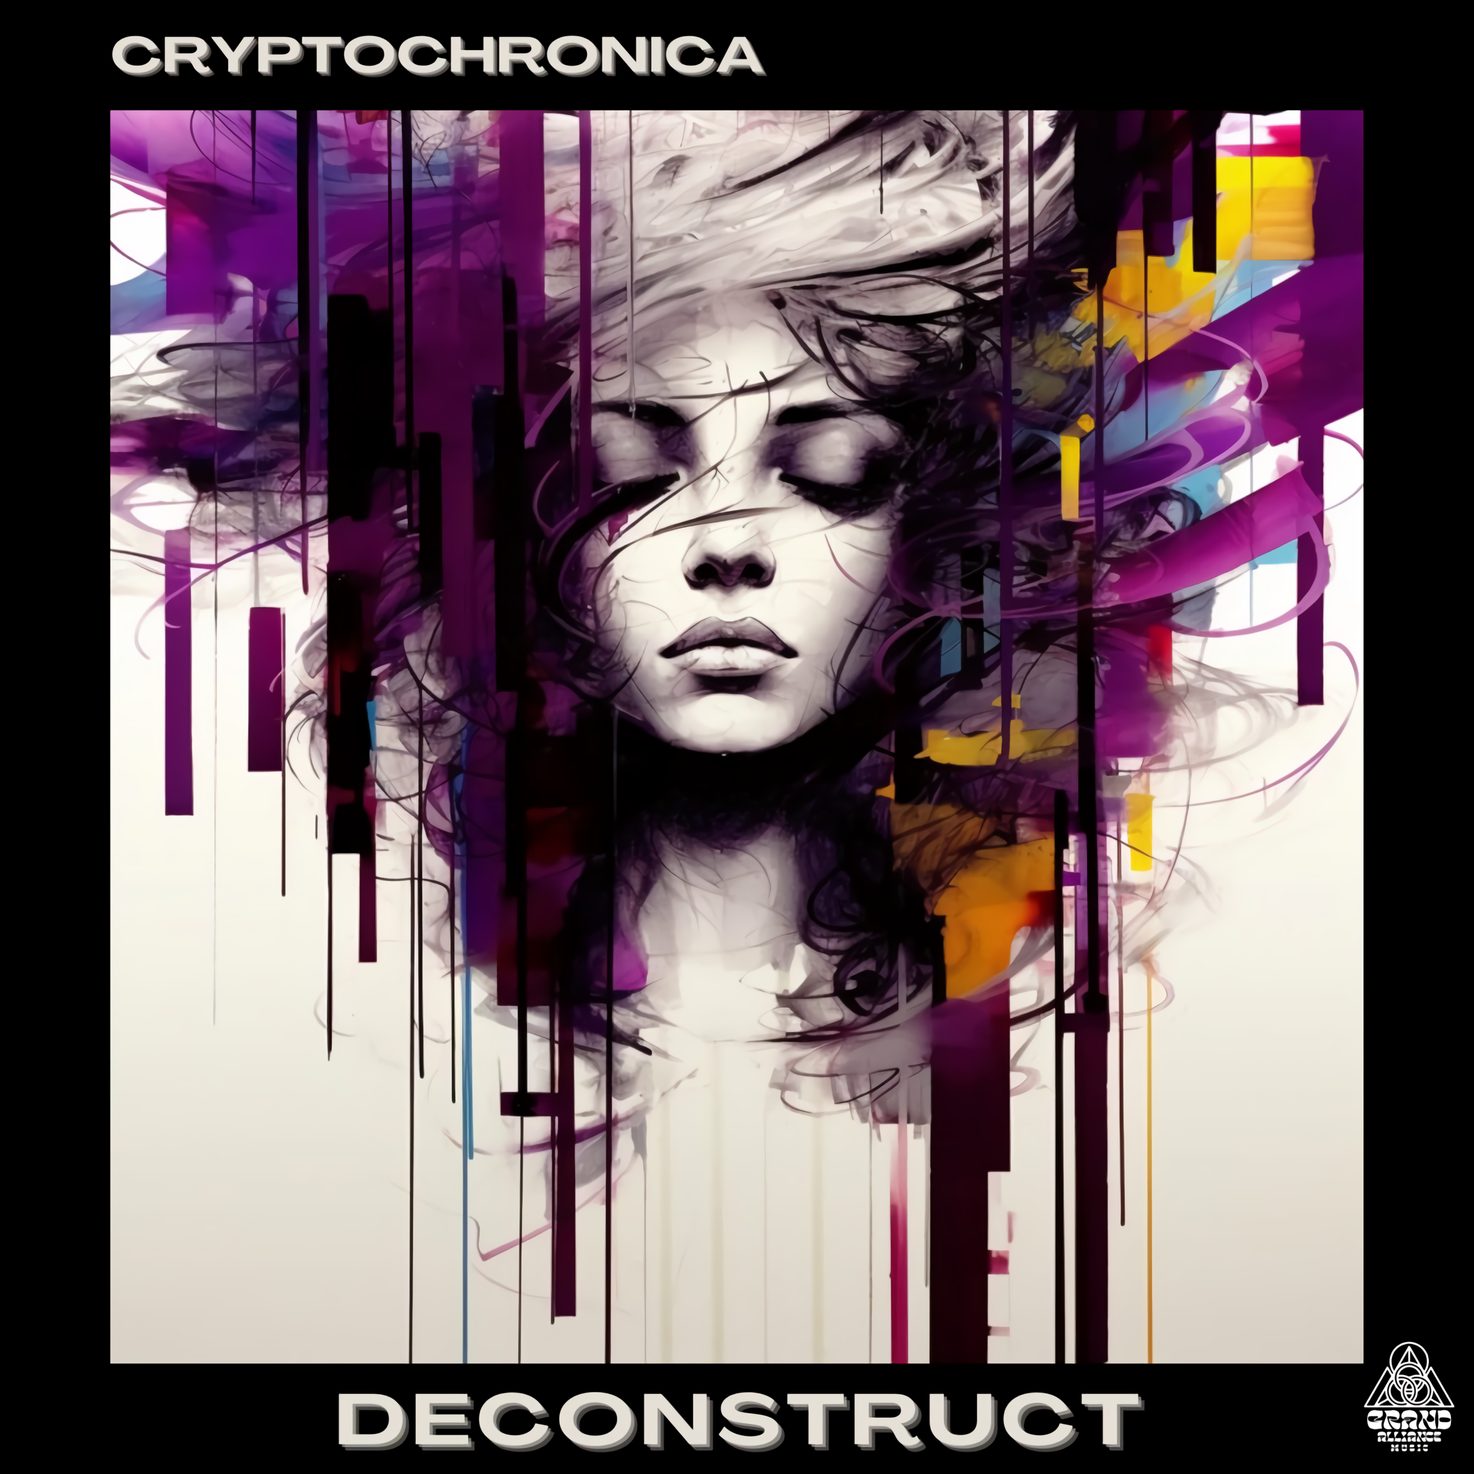 Deconstruct from Cryptochronica